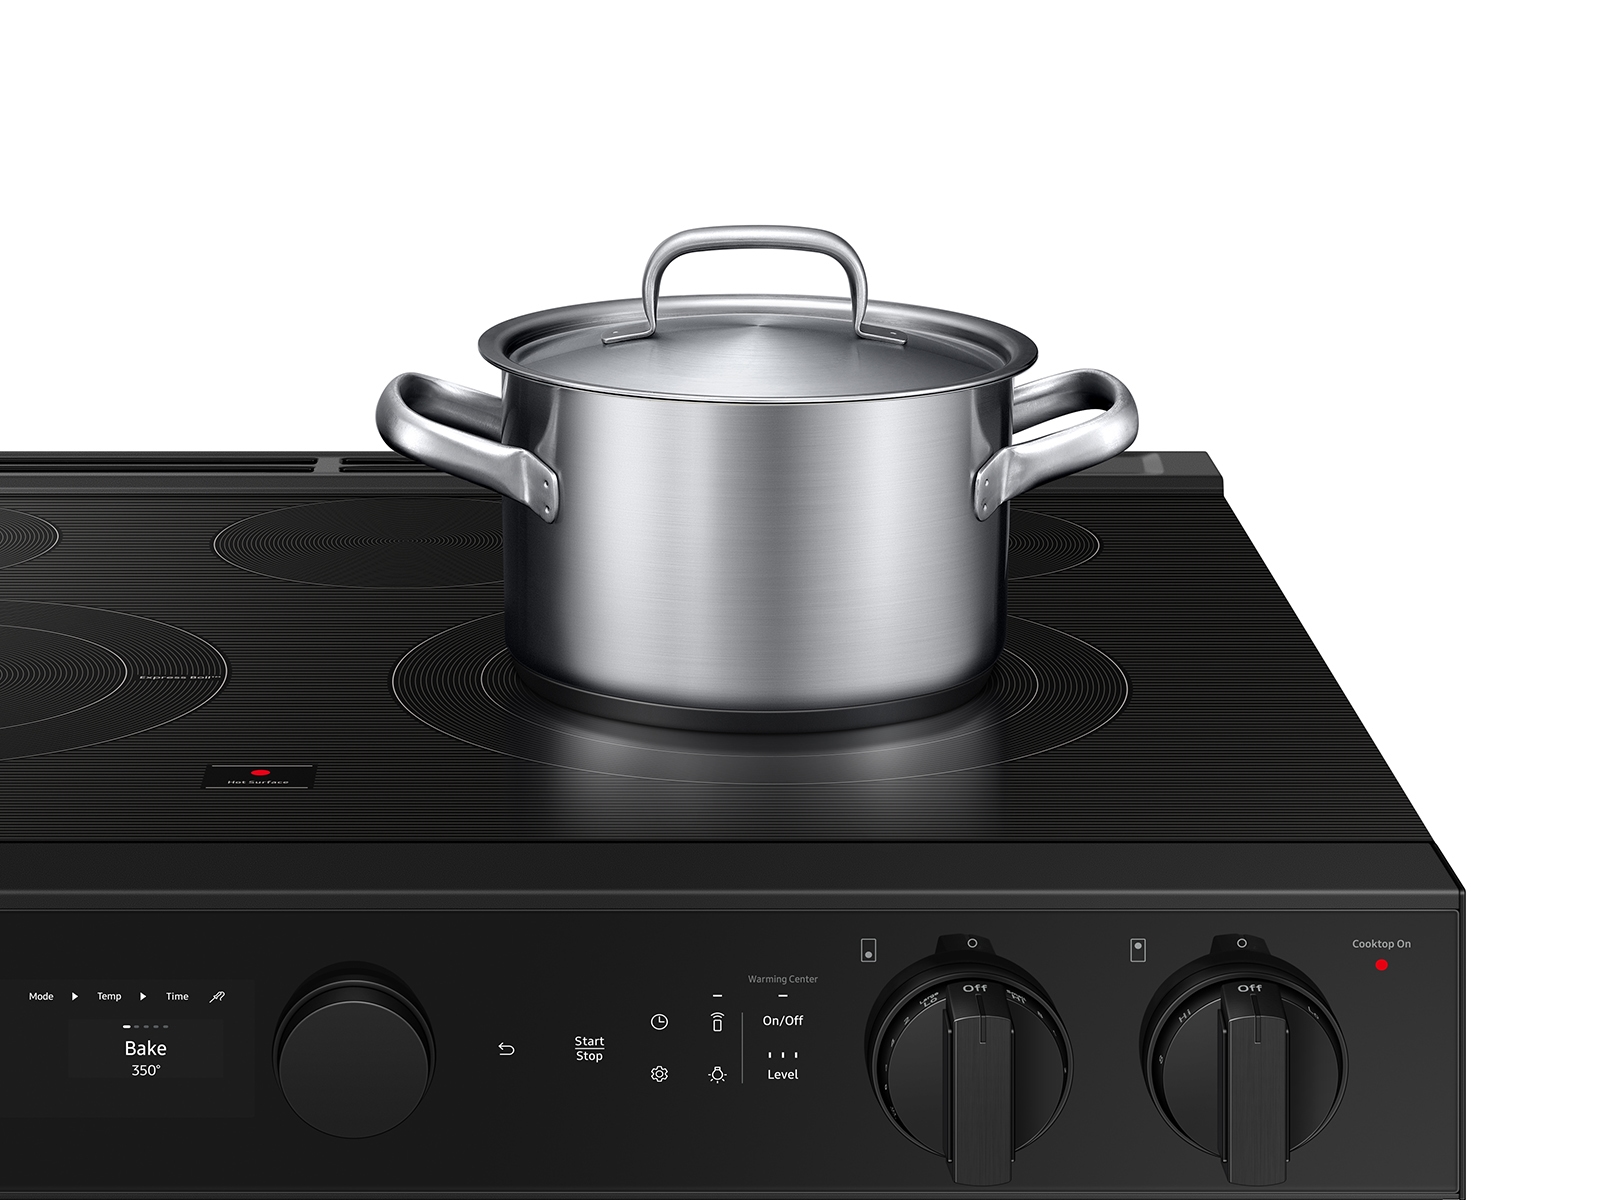 Thumbnail image of Bespoke 6.3 cu. ft. Smart Slide-In Electric Range with Air Sous Vide &amp; Air Fry in Matte Black Steel